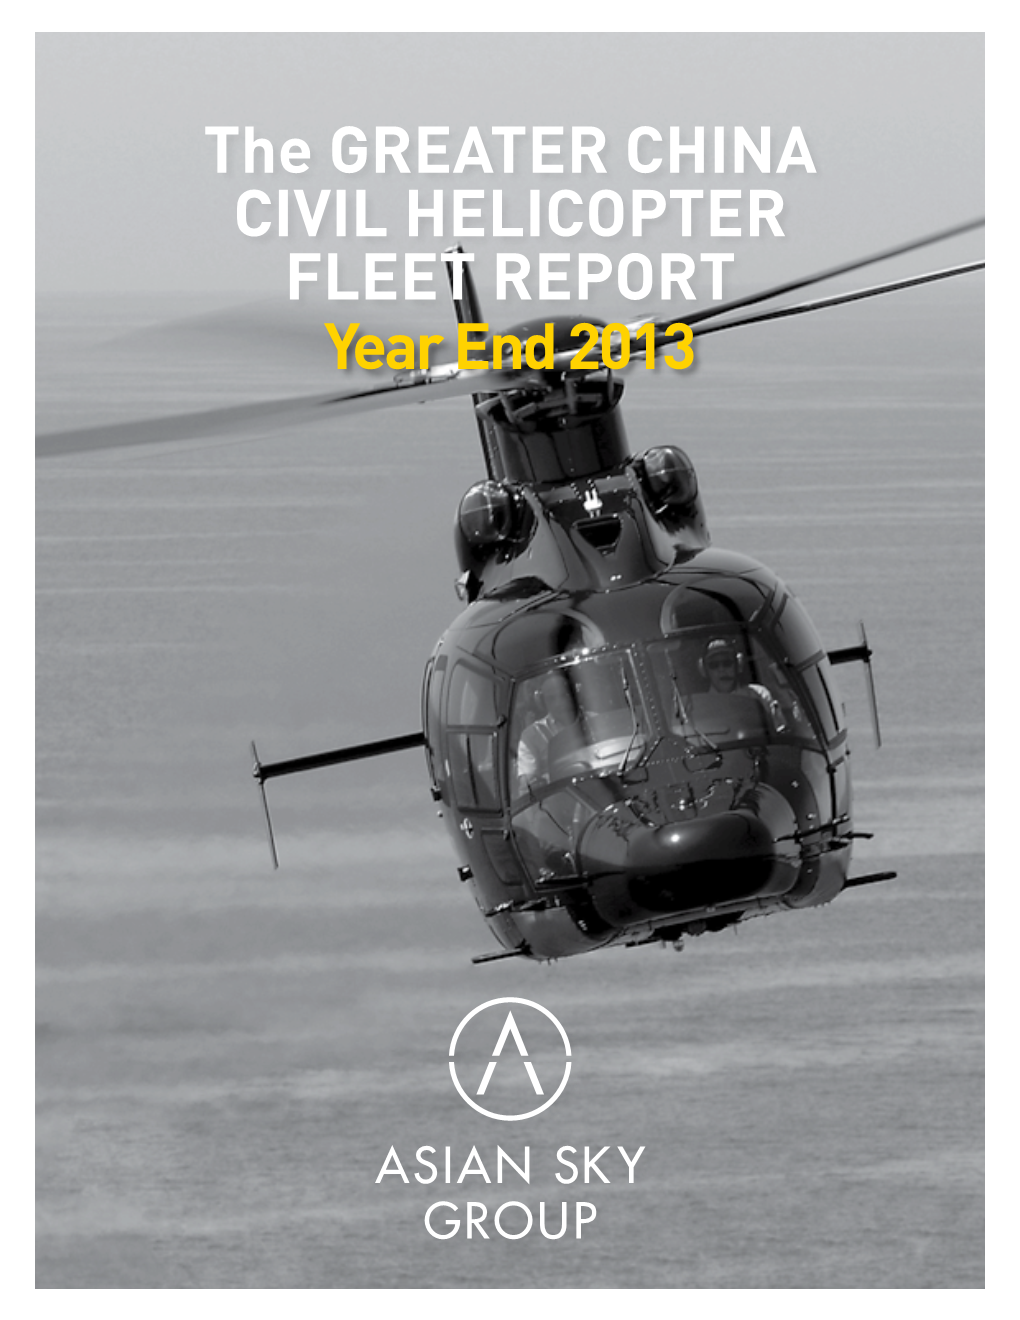 The GREATER CHINA CIVIL HELICOPTER FLEET REPORT Year End 2013 ABOUT ASIAN SKY GROUP